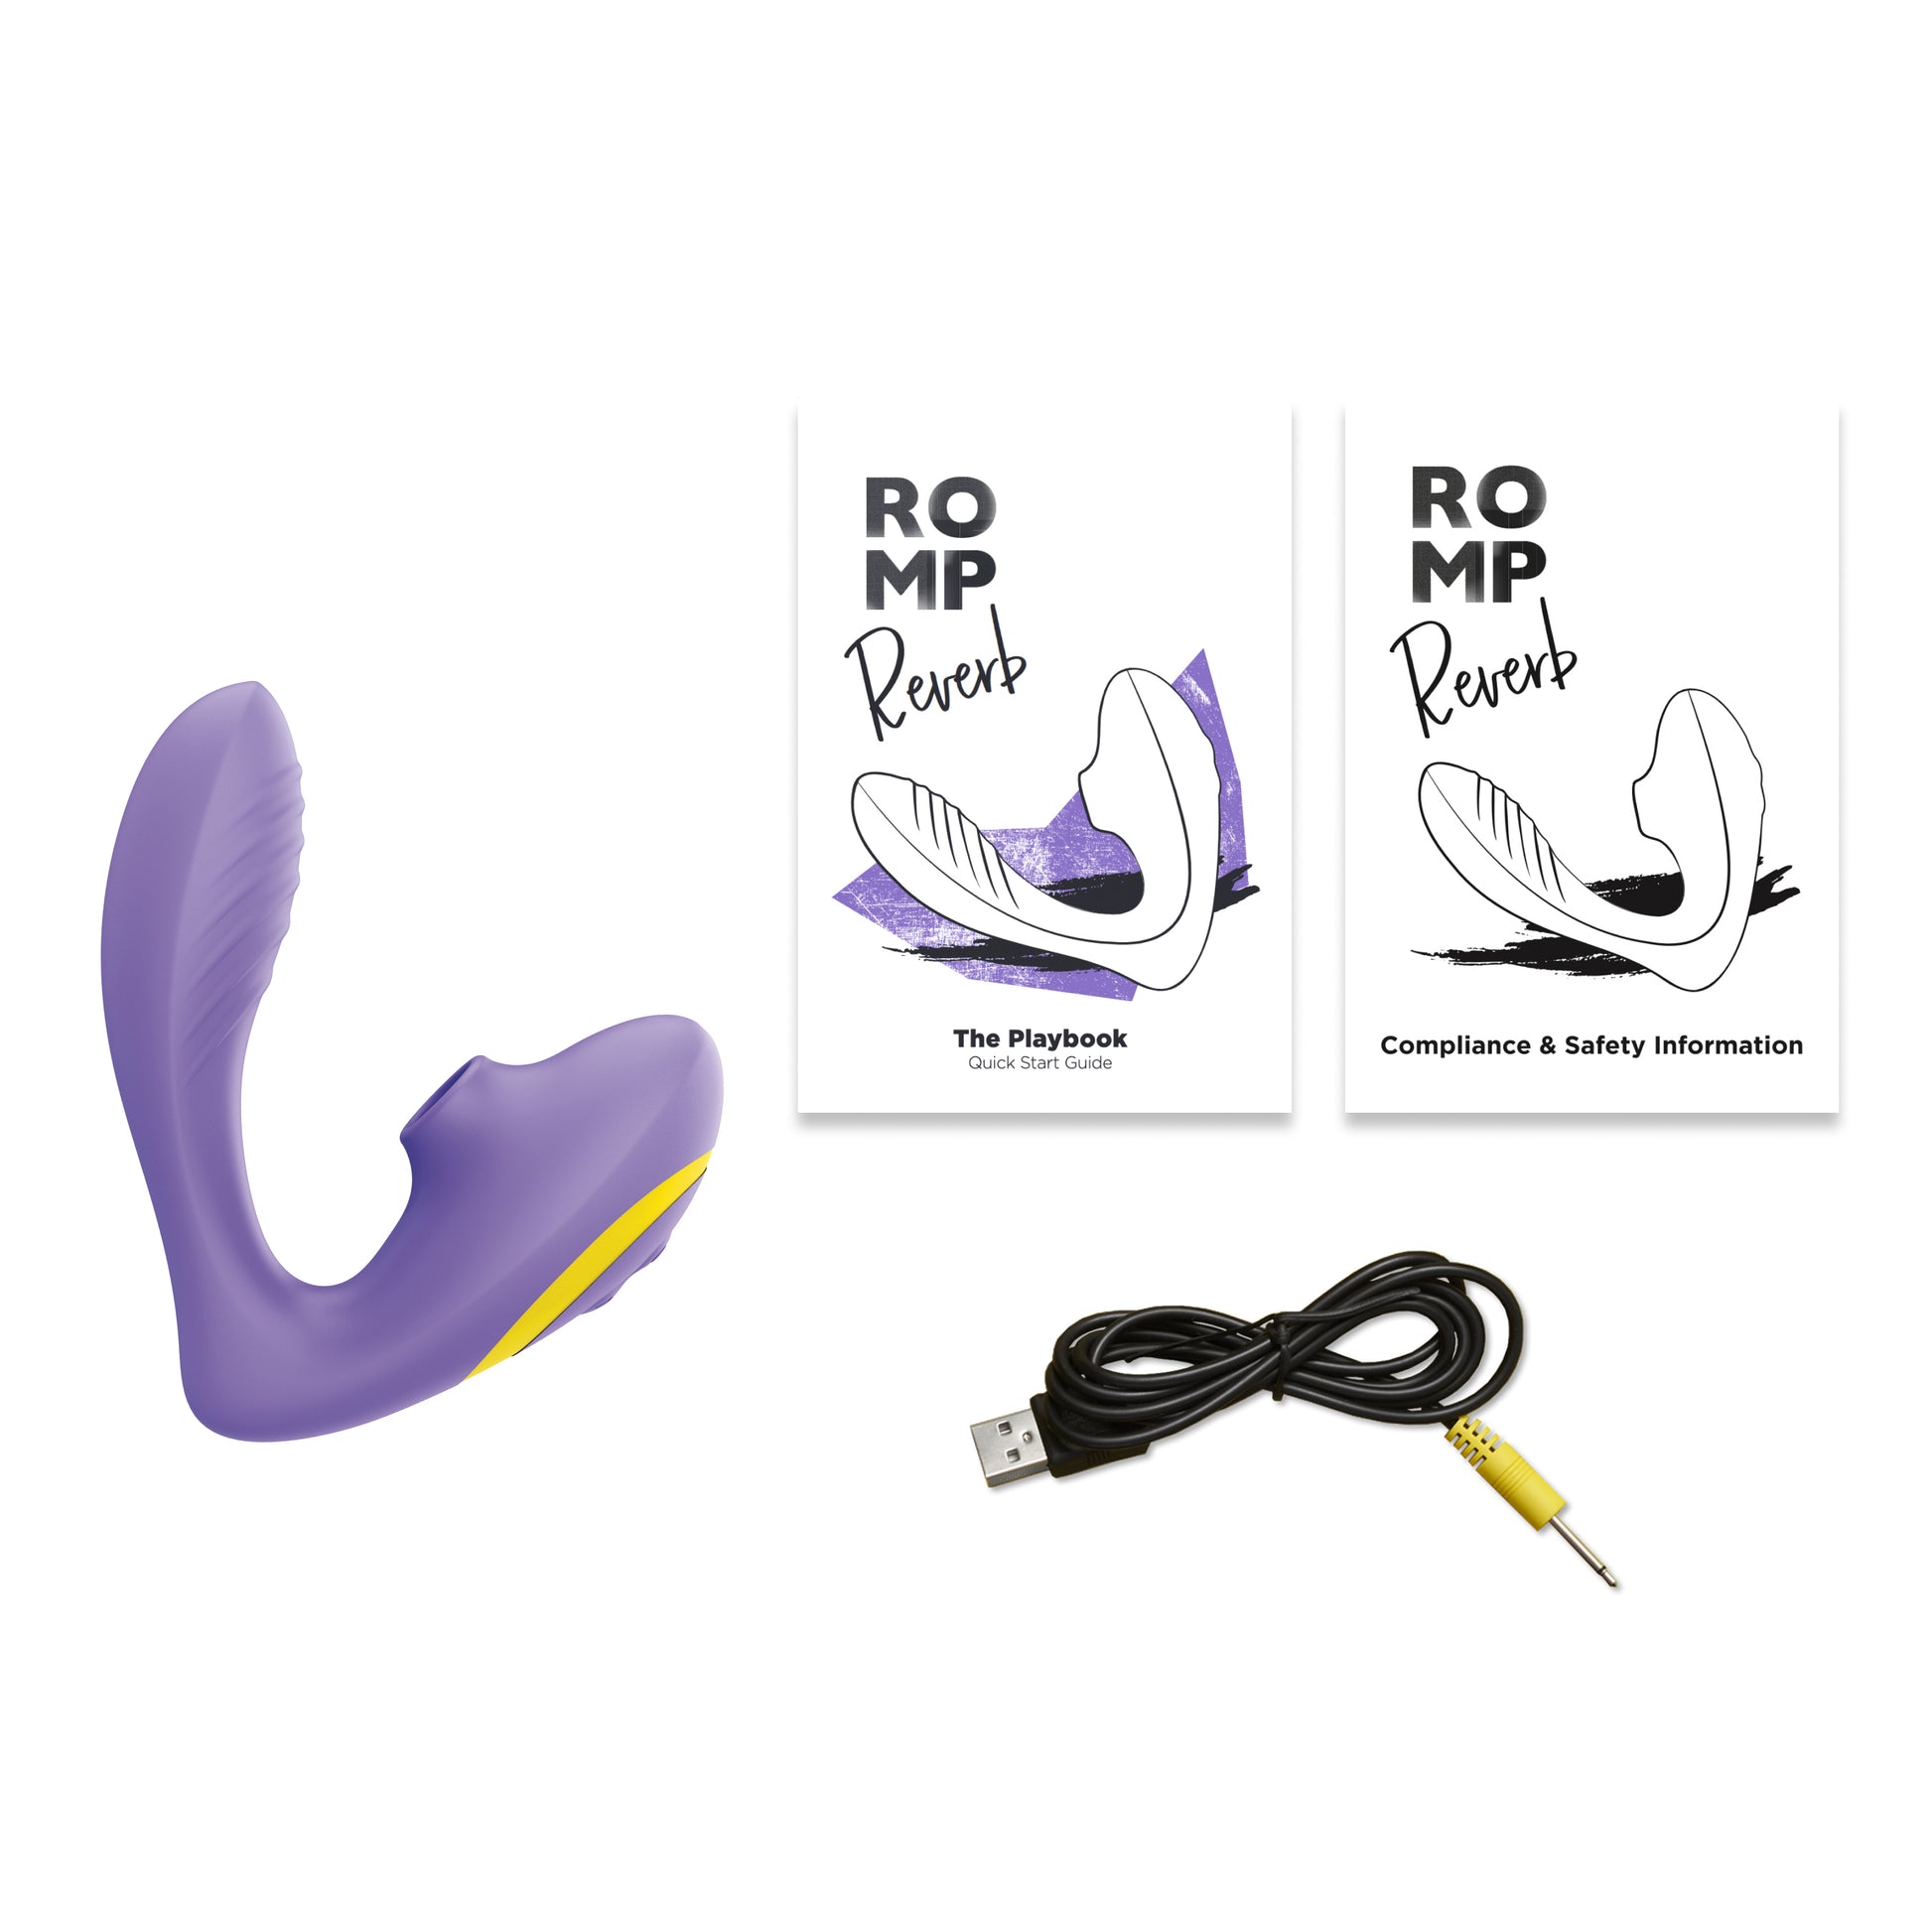 Romp Reverb Clitoral and G-spot Stimulator - Thorn & Feather